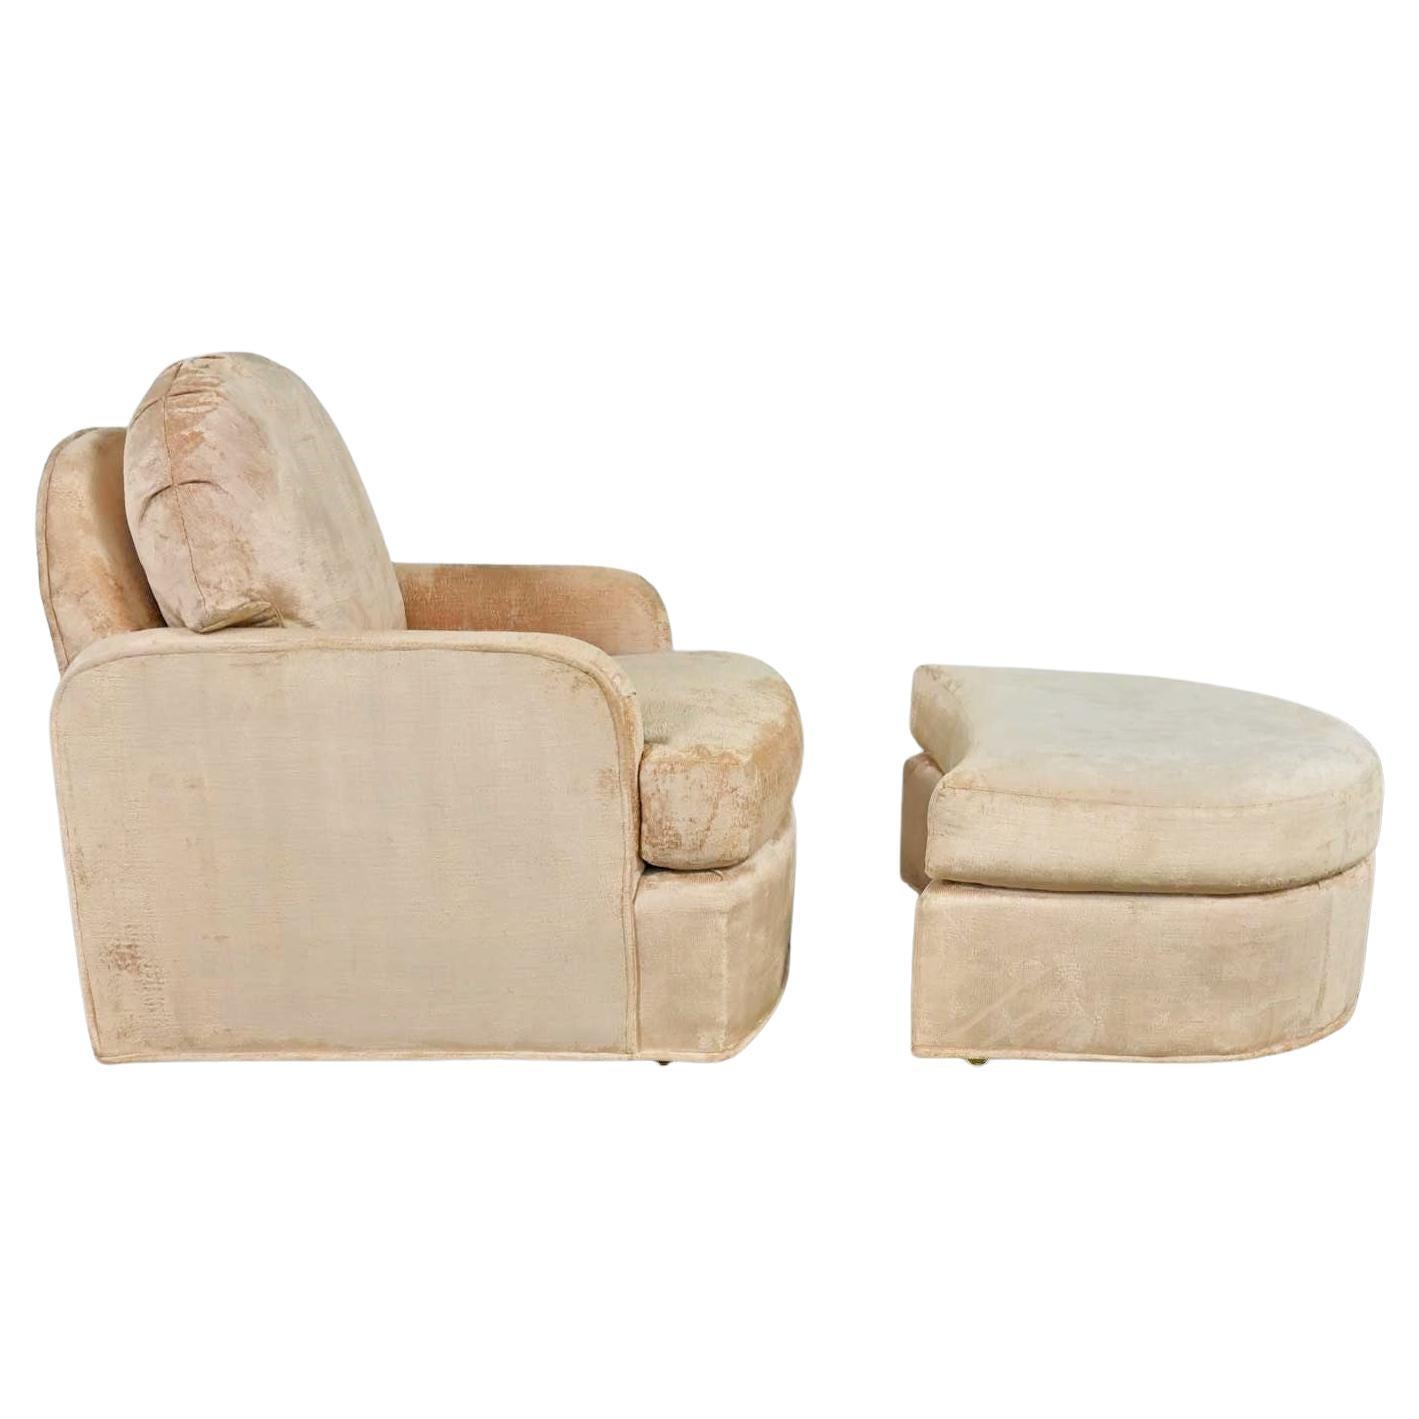 Vintage Modern Drexel Club Chair & Ottoman with Casters Original Tan Chenille For Sale